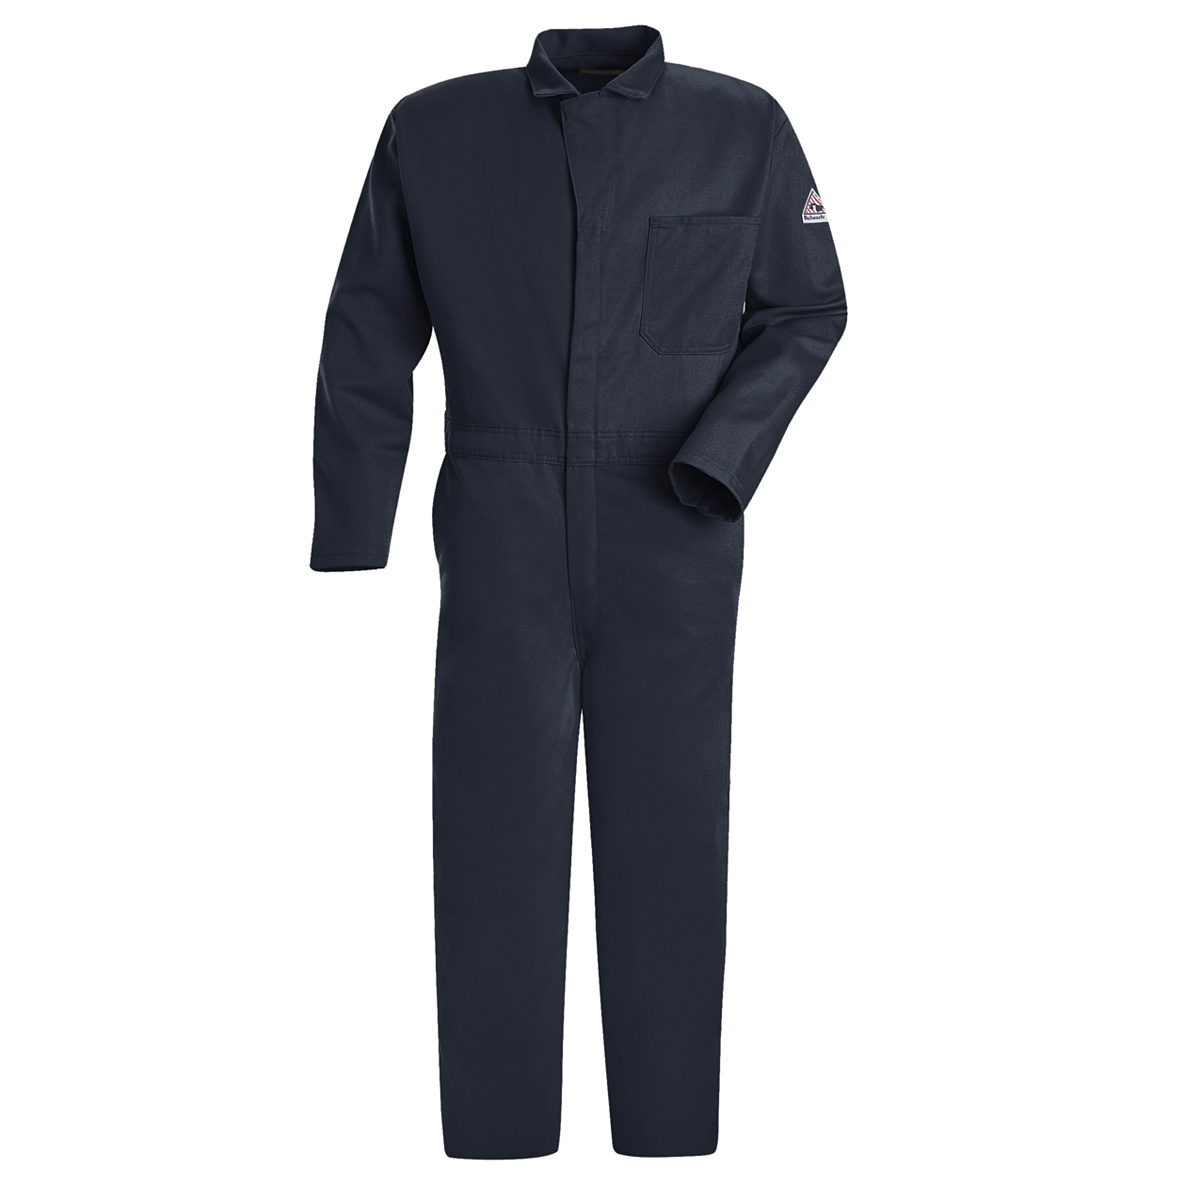 Bulwark® 56 Regular Navy Blue EXCEL FR® Twill Cotton Flame Resistant Coveralls With Zipper Front Closure